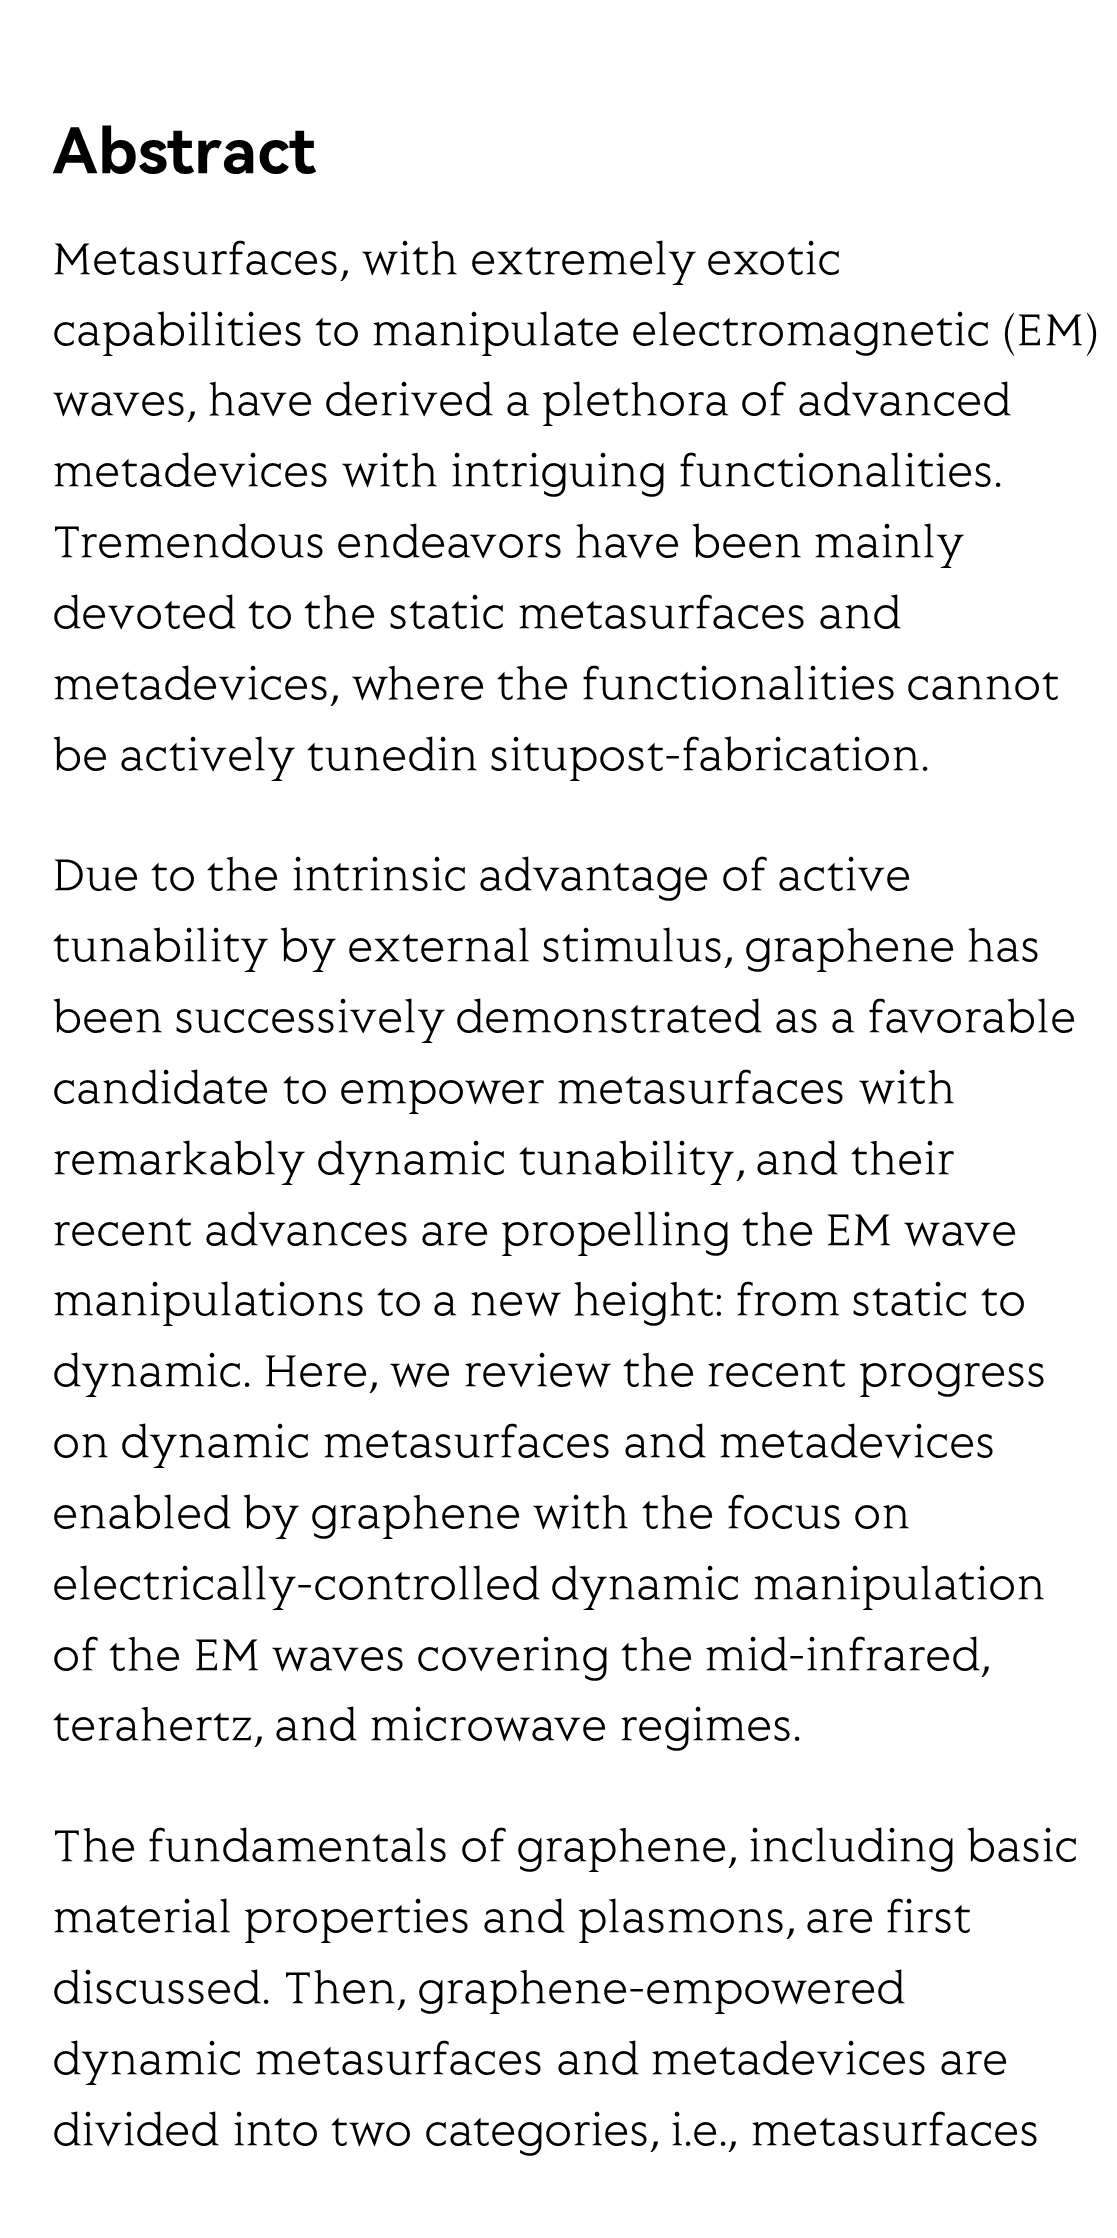 Graphene-empowered dynamic metasurfaces and metadevices_2